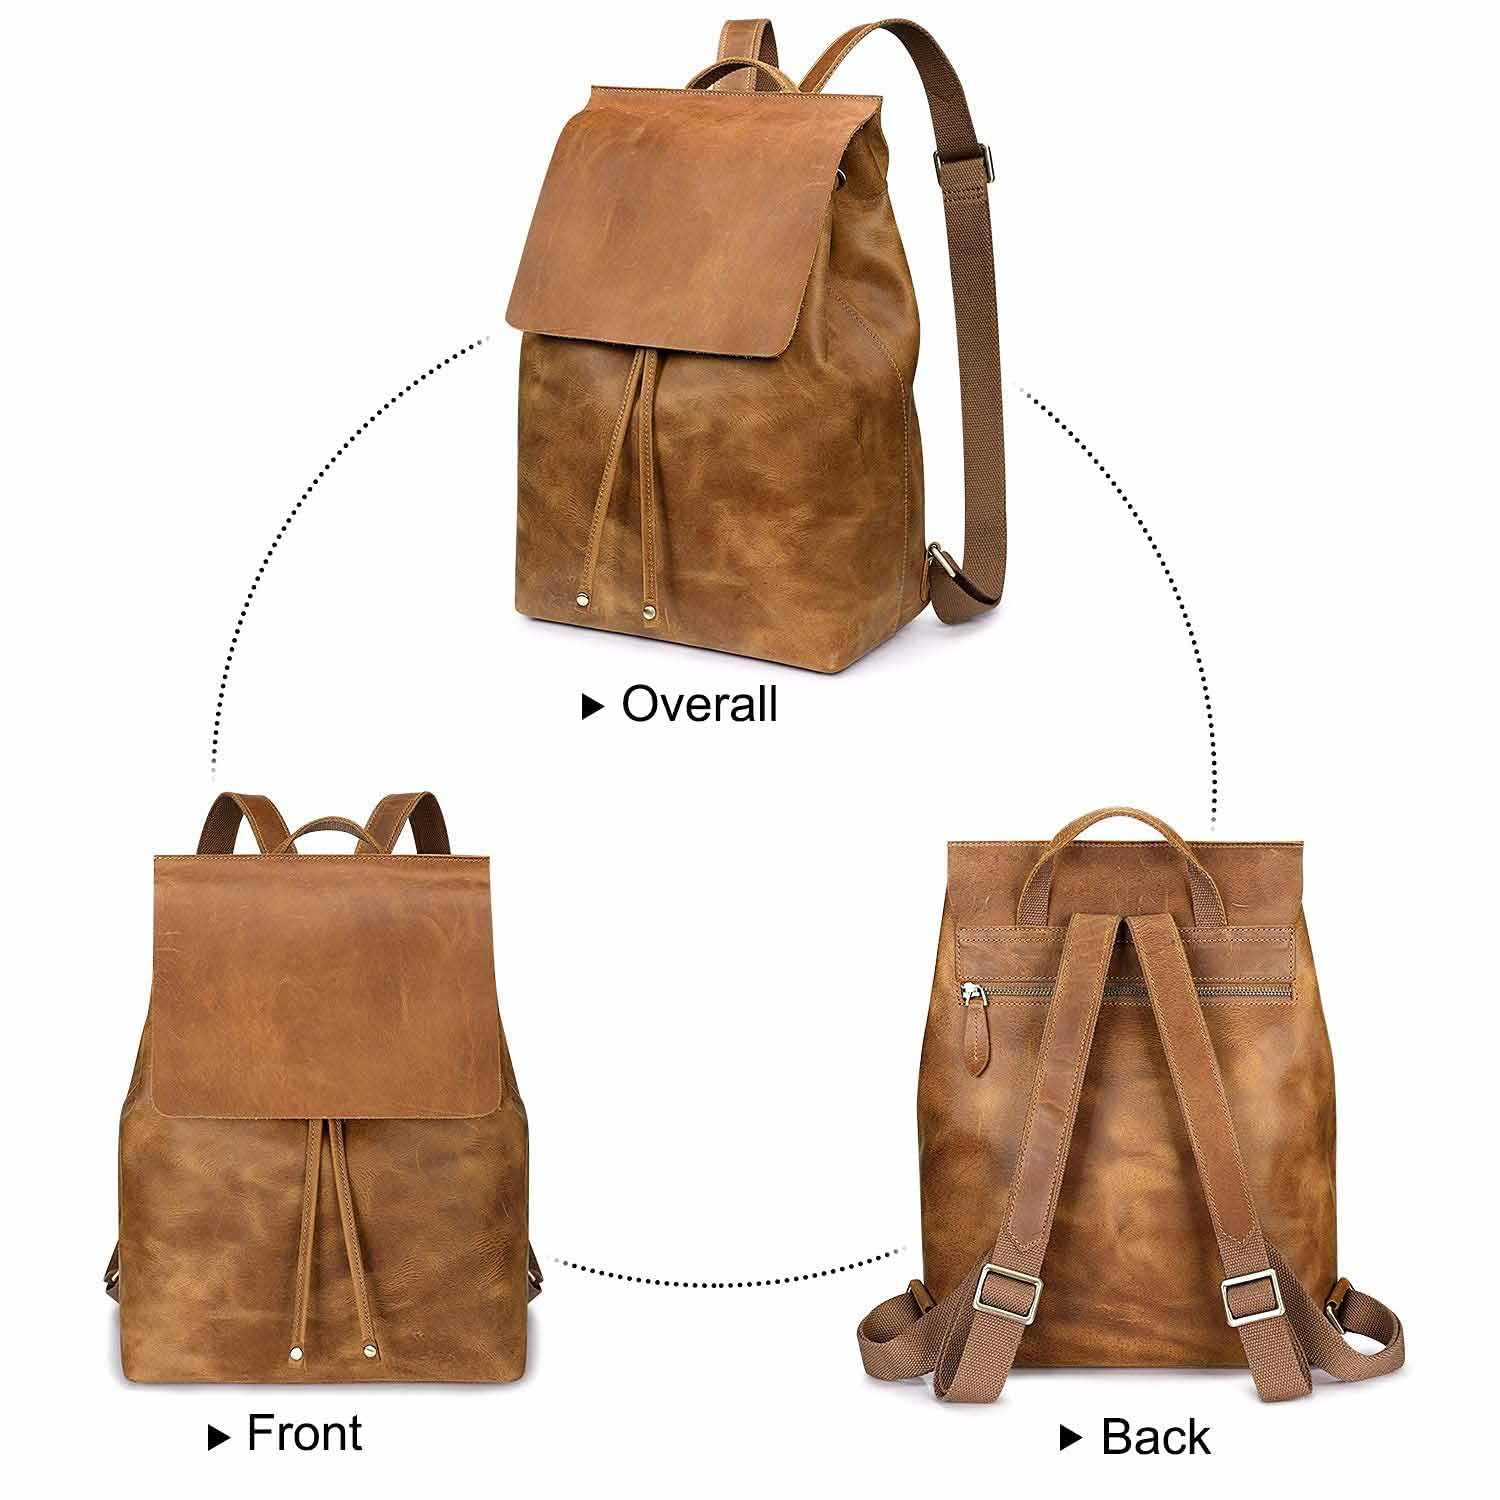 Crazy Horse Leather Backpack